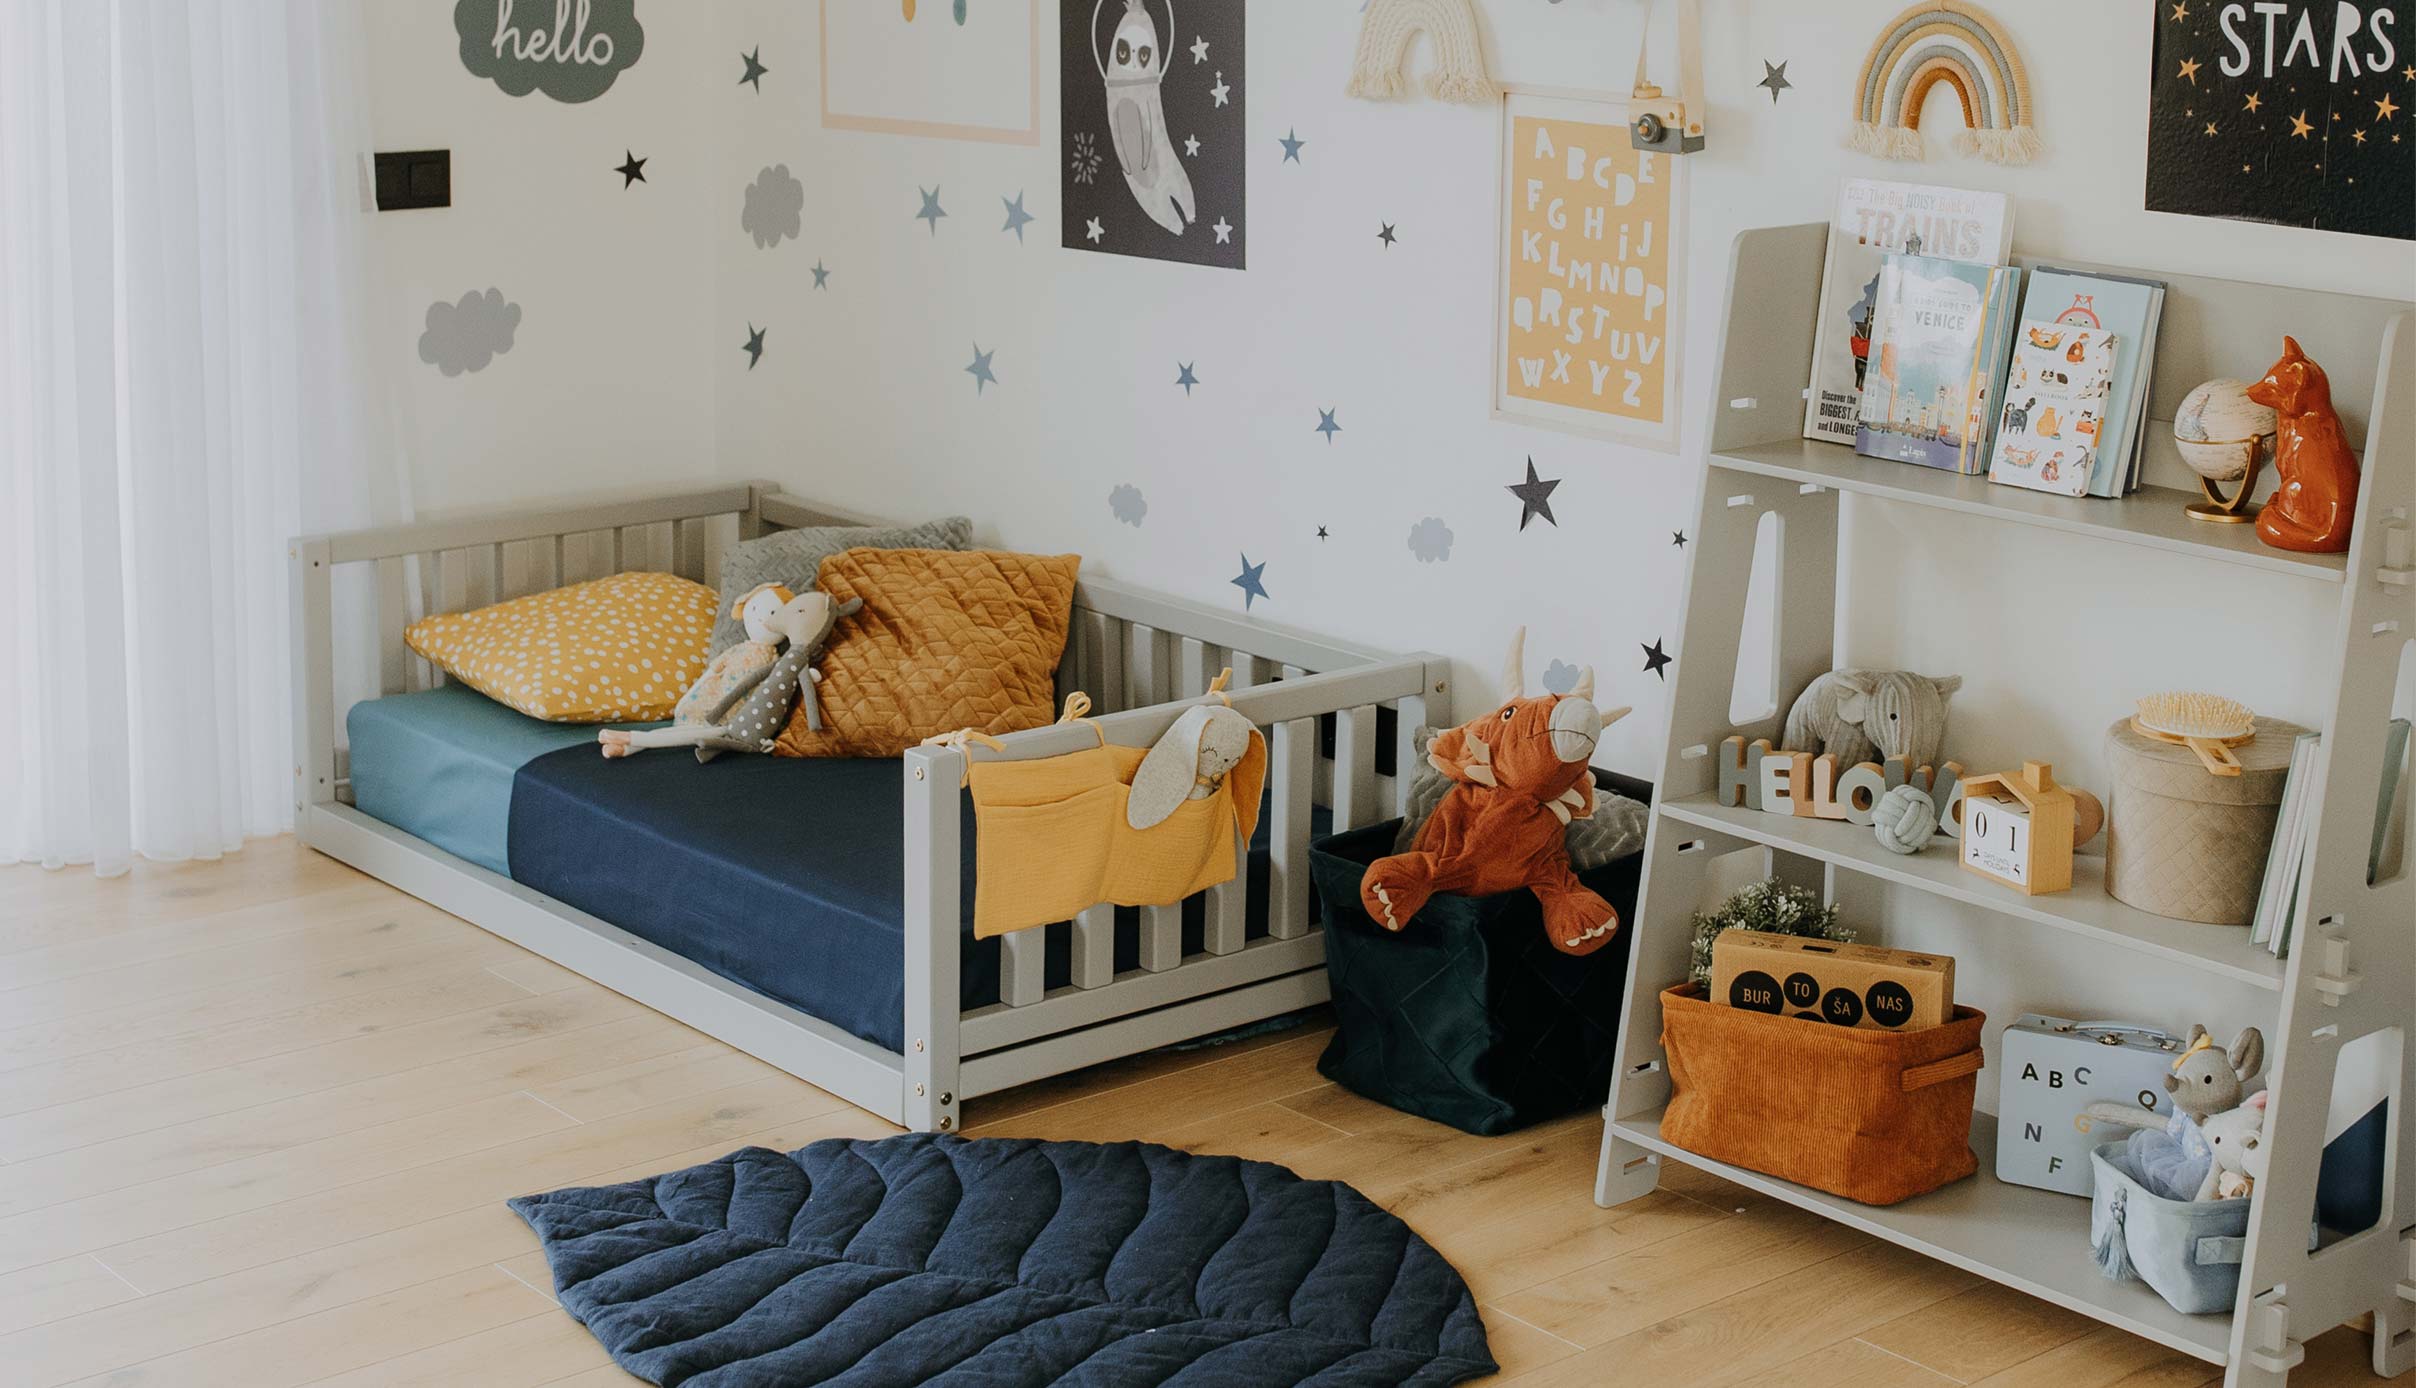 A child's room with a bed, bookshelf, and wall art.